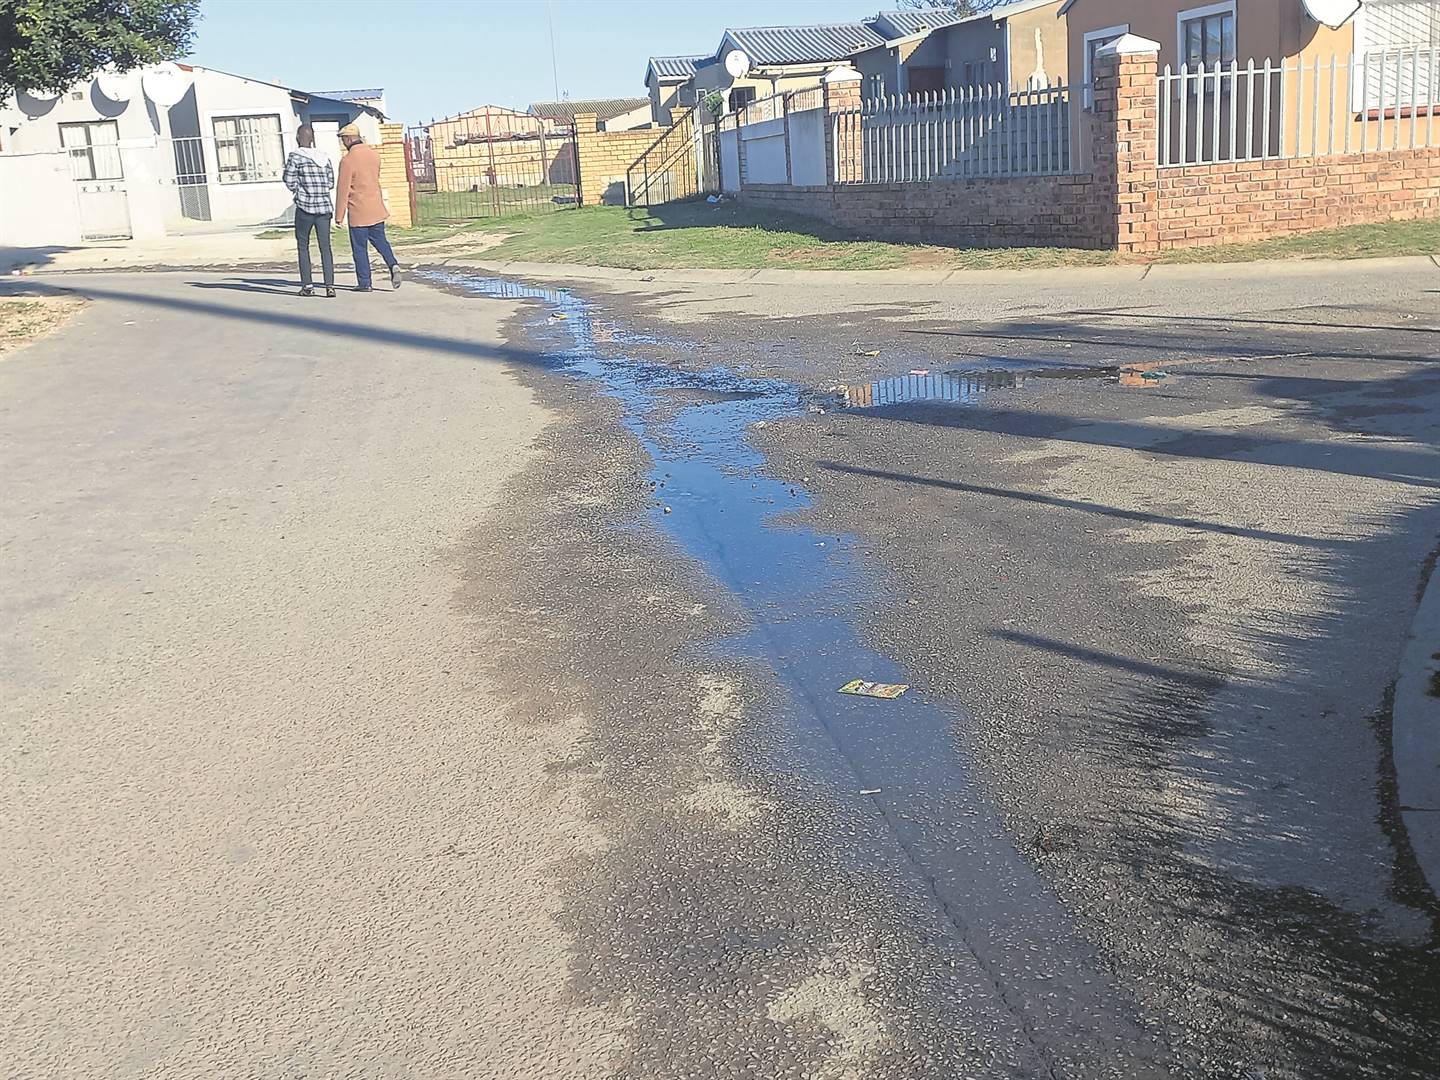 Nelson Mandela Bay has a backlog of 3 500 water leaks, which account for 29% of the metro’s water consumption. ­    Photo by Luvuyo Mehlwana